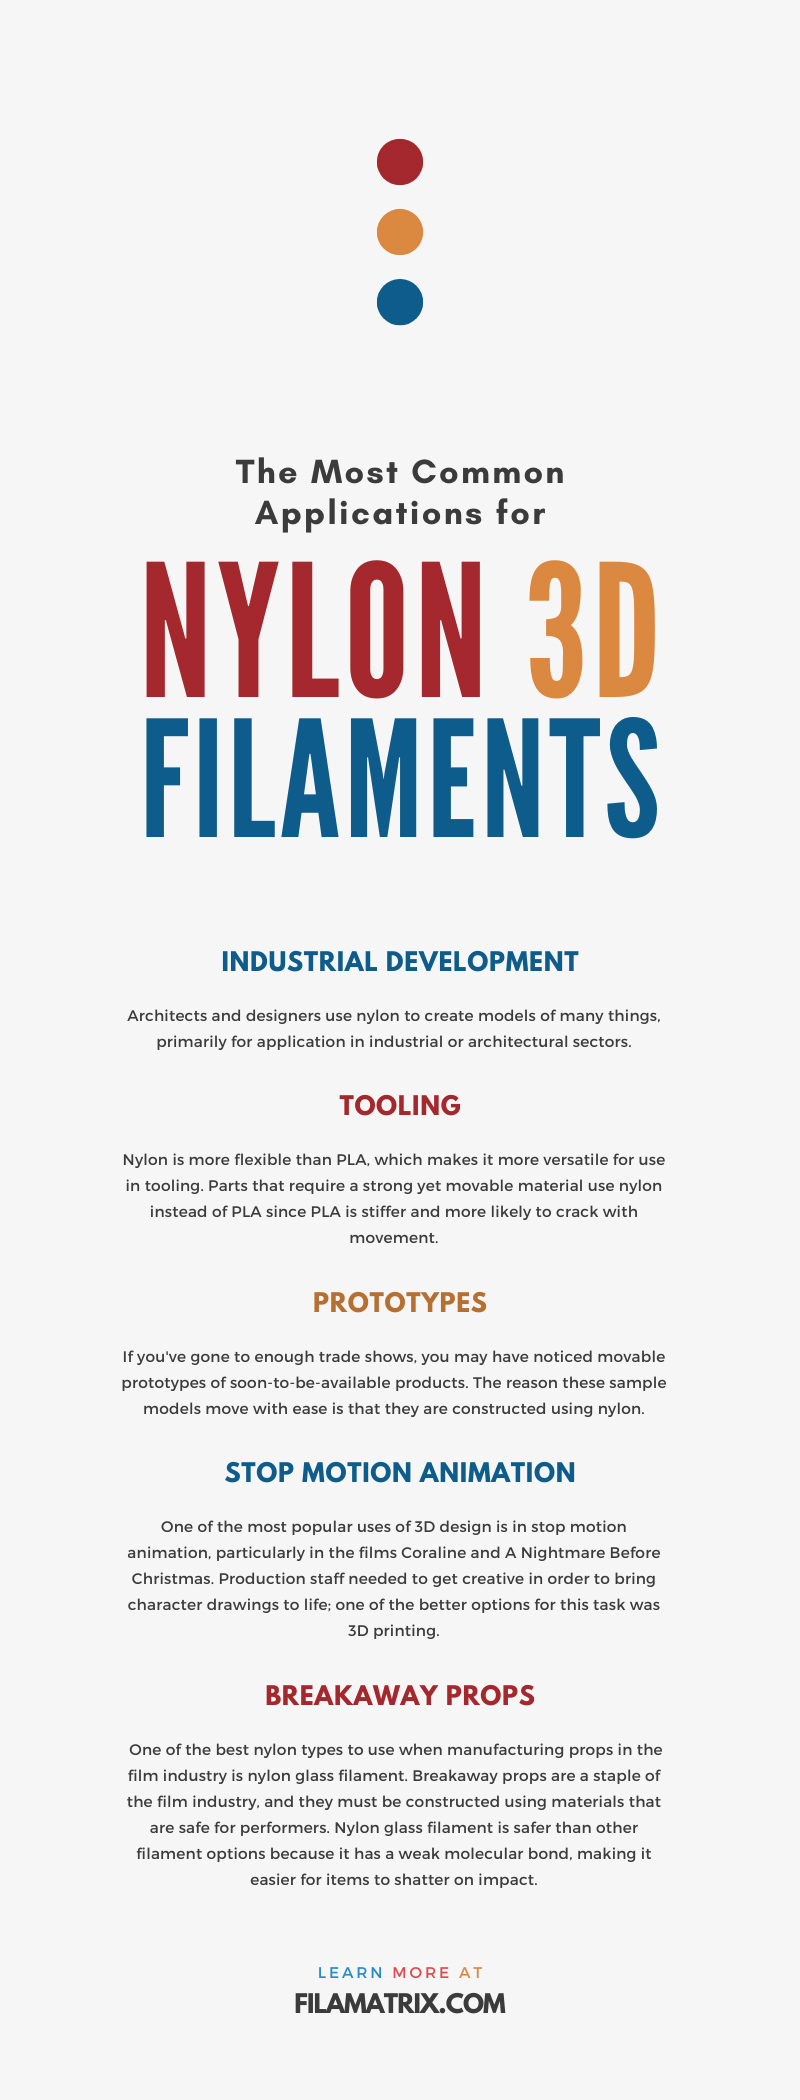 The Most Common Applications for Nylon 3D Filaments